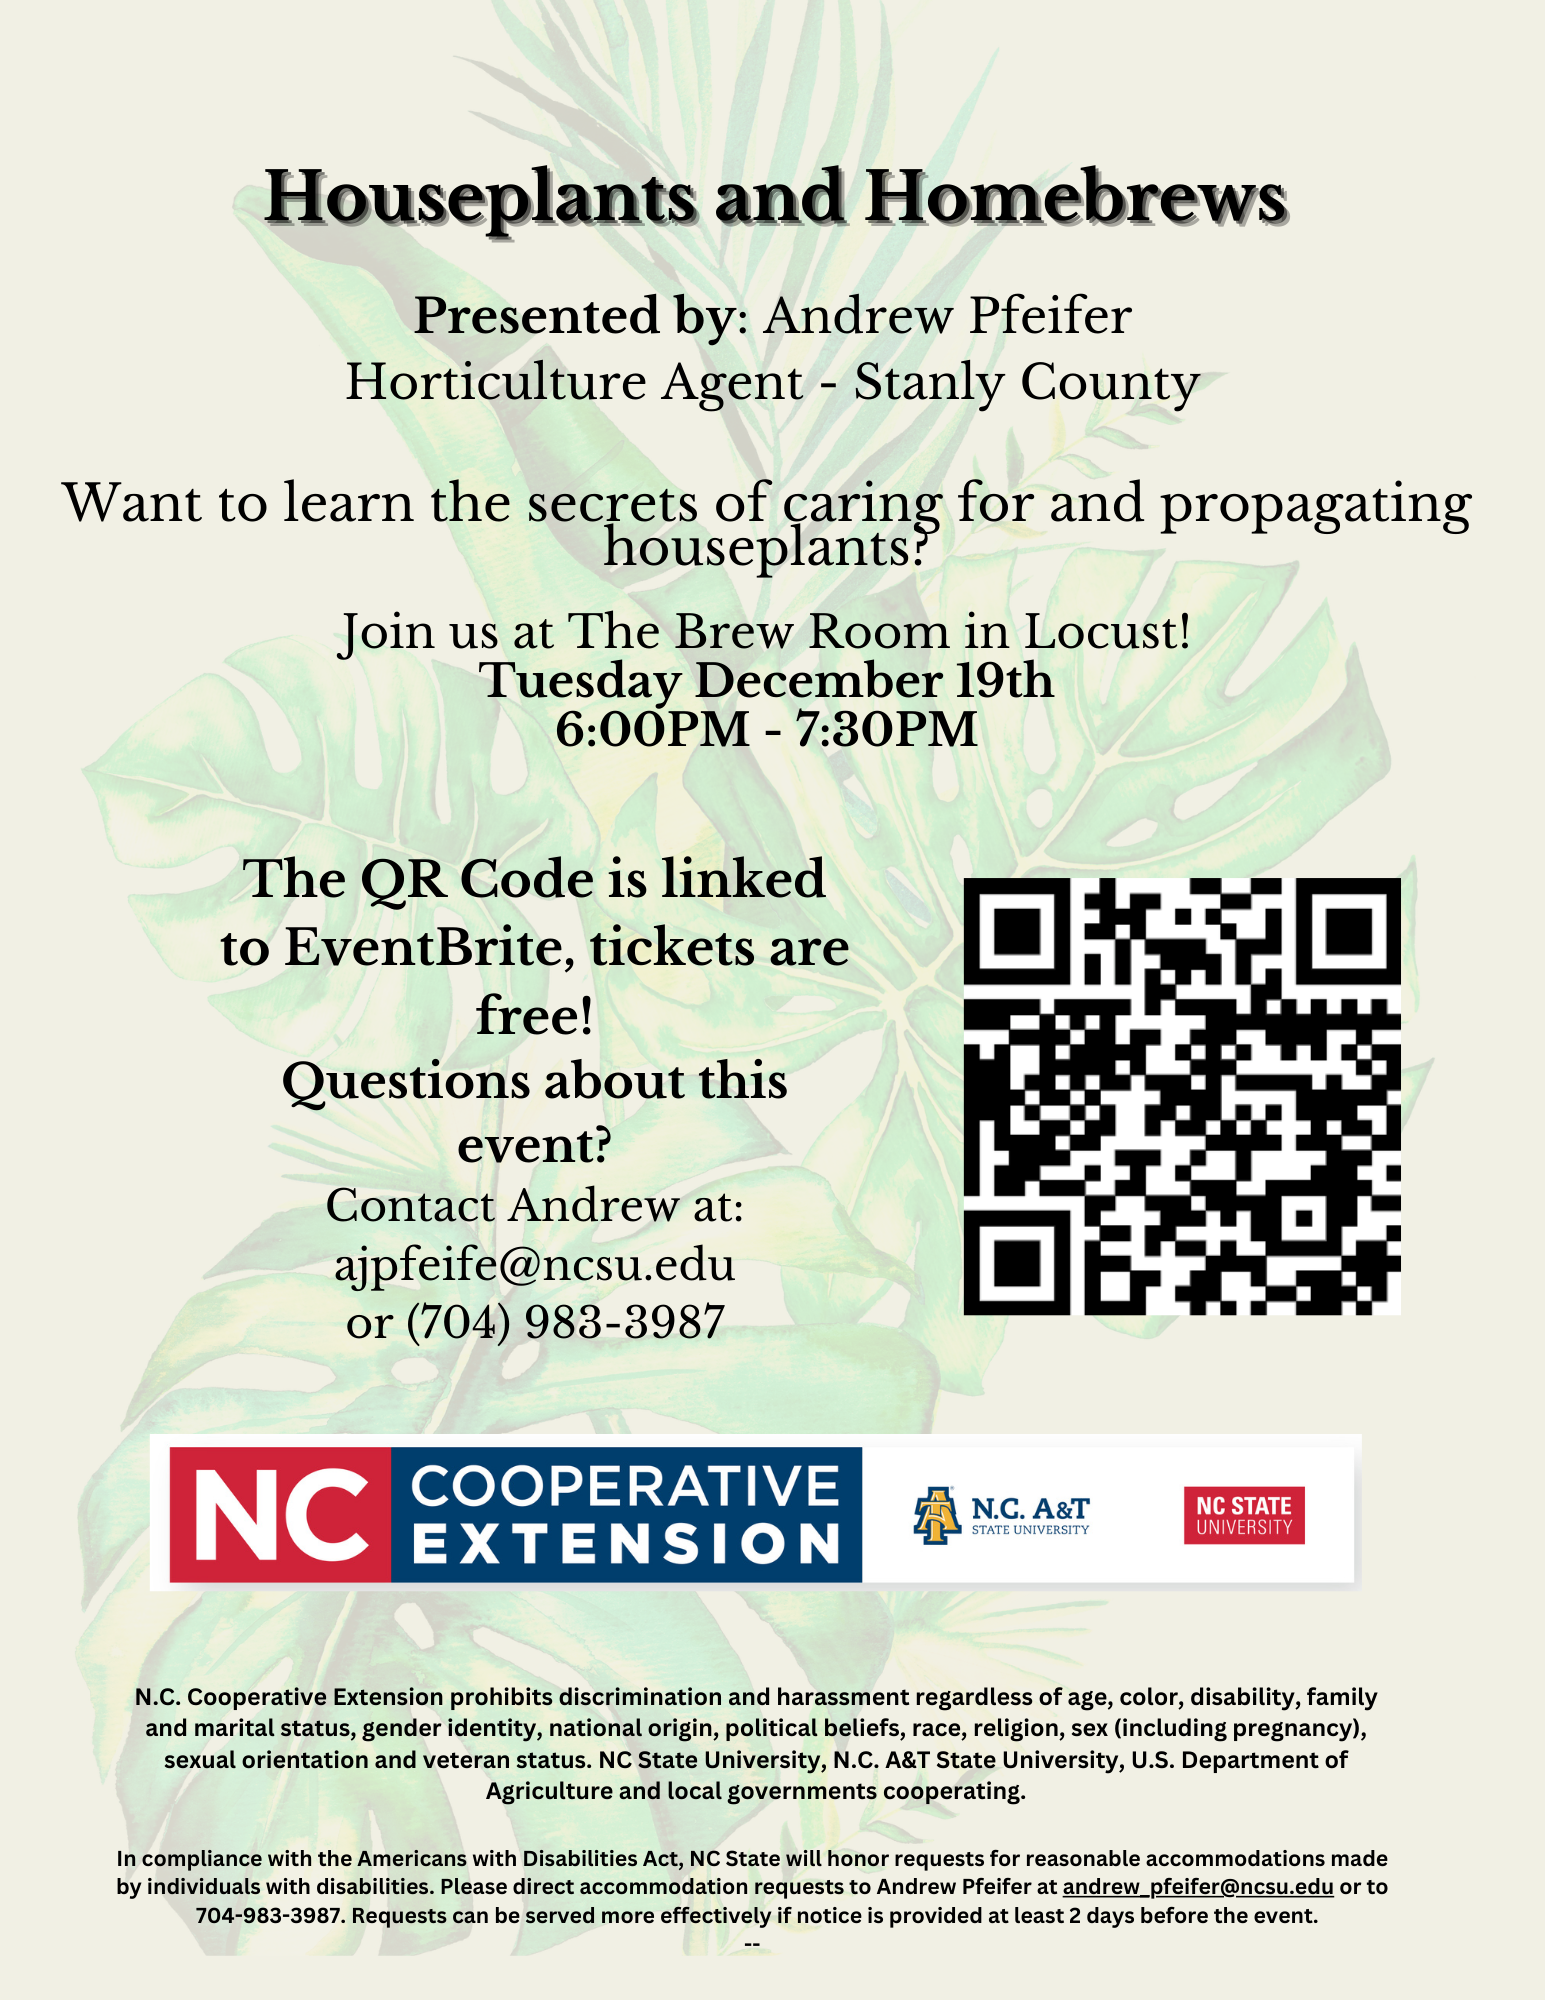 Houseplants and Homebrews,Presented by: Andrew Pfeifer Horticulture Agent - Stanly CountyWant to learn the secrets of caring for and propagating houseplants? Join us at The Brew Room in Locust! Tuesday December 19th 6:00 p.m. - 7:30PMThe QR Code is linked to EventBrite, tickets are free! Questions about this event? Contact Andrew at: ajpfeife@ncsu.edu or (704) 983-3987N.C. Cooperative Extension prohibits discrimination and harassment regardless of age, color, disability, family and marital status, gender identity, national origin, political beliefs, race, religion, sex (including pregnancy), sexual orientation and veteran status. NC State University, N.C. A&T State University, U.S. Department of Agriculture and local governments cooperating.,In compliance with the Americans with Disabilities Act, NC State will honor requests for reasonable accommodations made by individuals with disabilities. Please direct accommodation requests to Andrew Pfeifer at andrew_pfeifer@ncsu.edu or to 704-983-3987. Requests can be served more effectively if notice is provided at least 2 days before the event. --